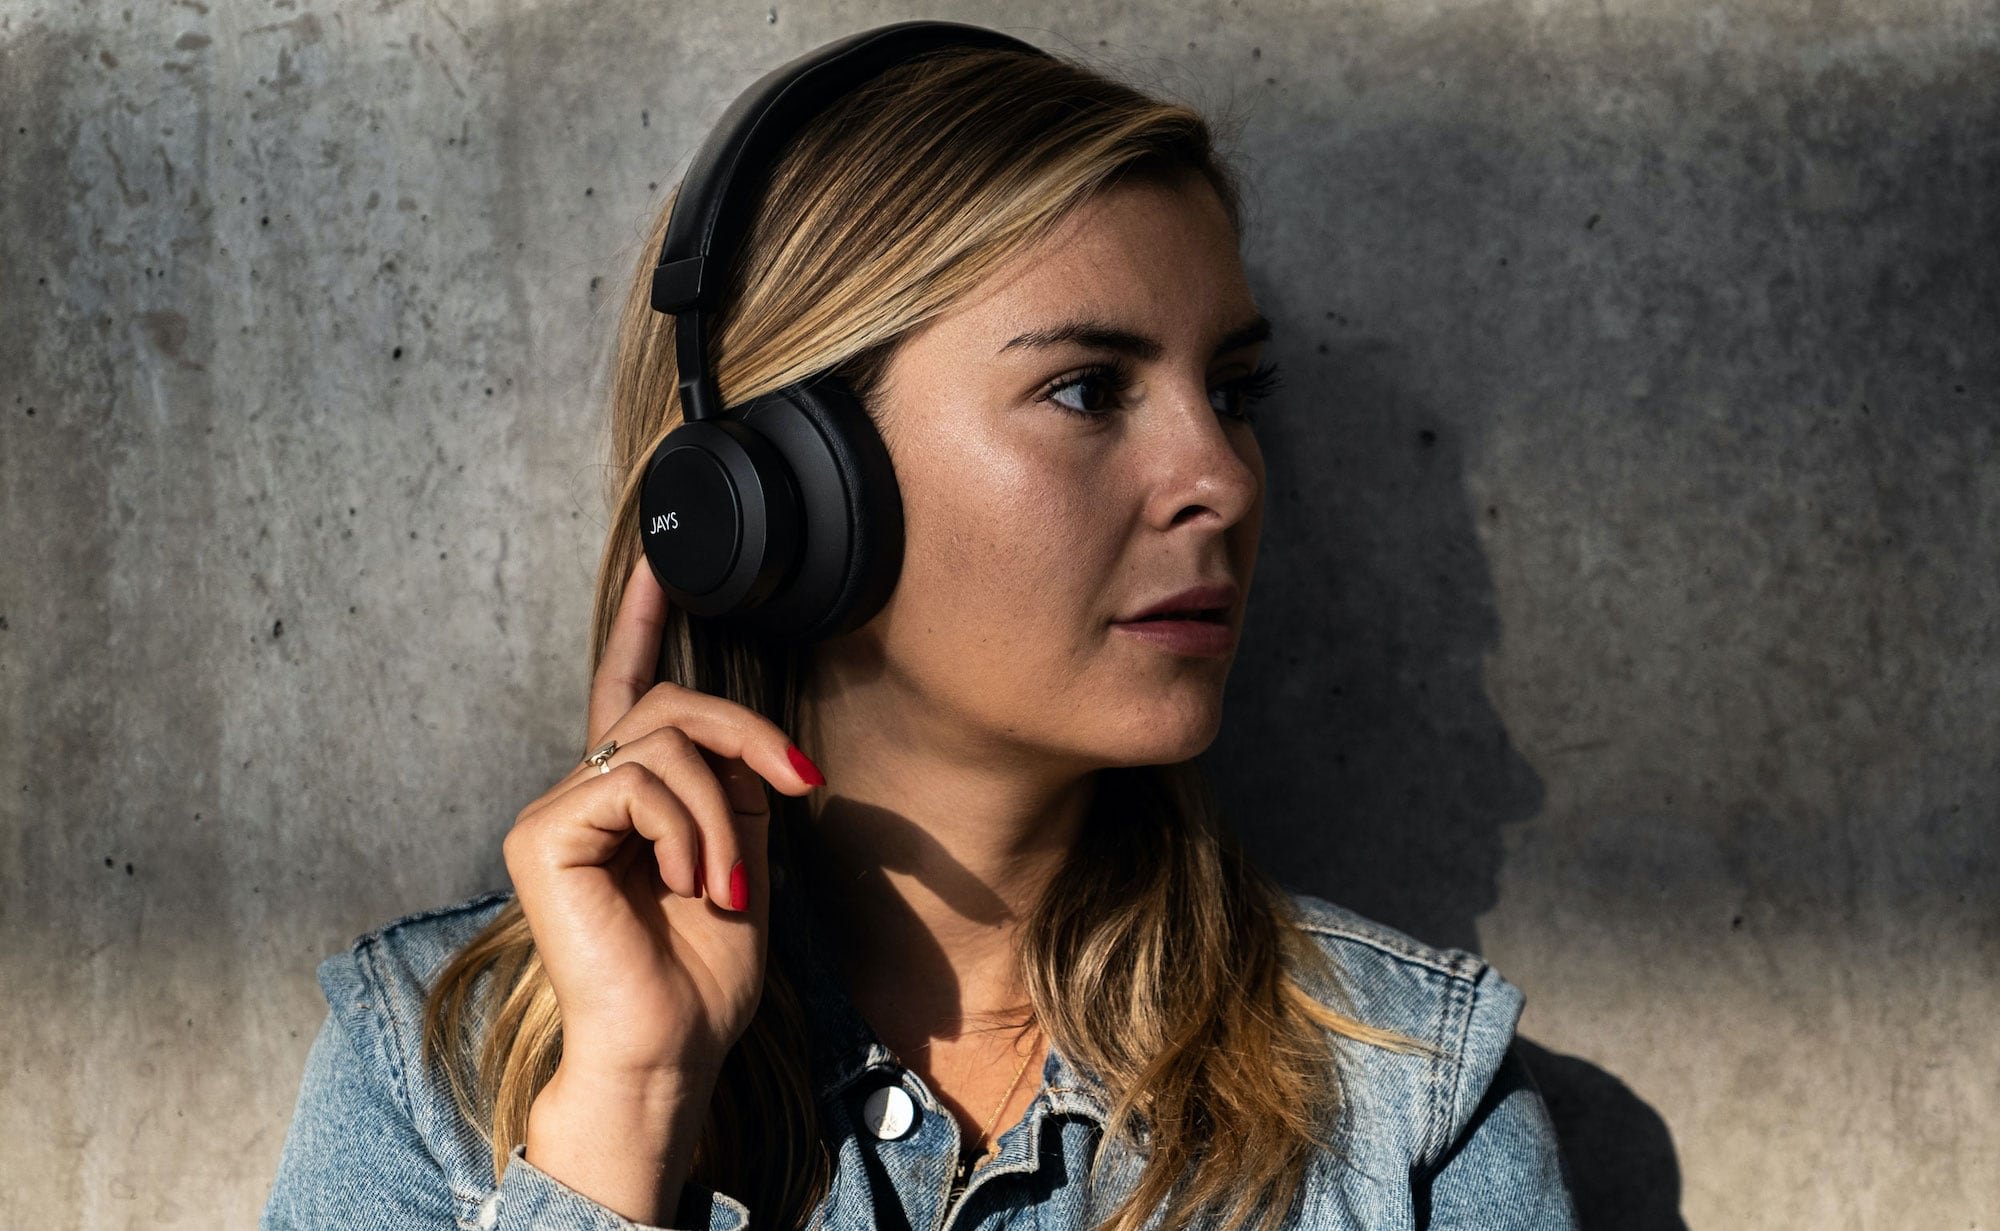 Jays q-Seven Wireless ANC Headphones provide 30 hours of playtime